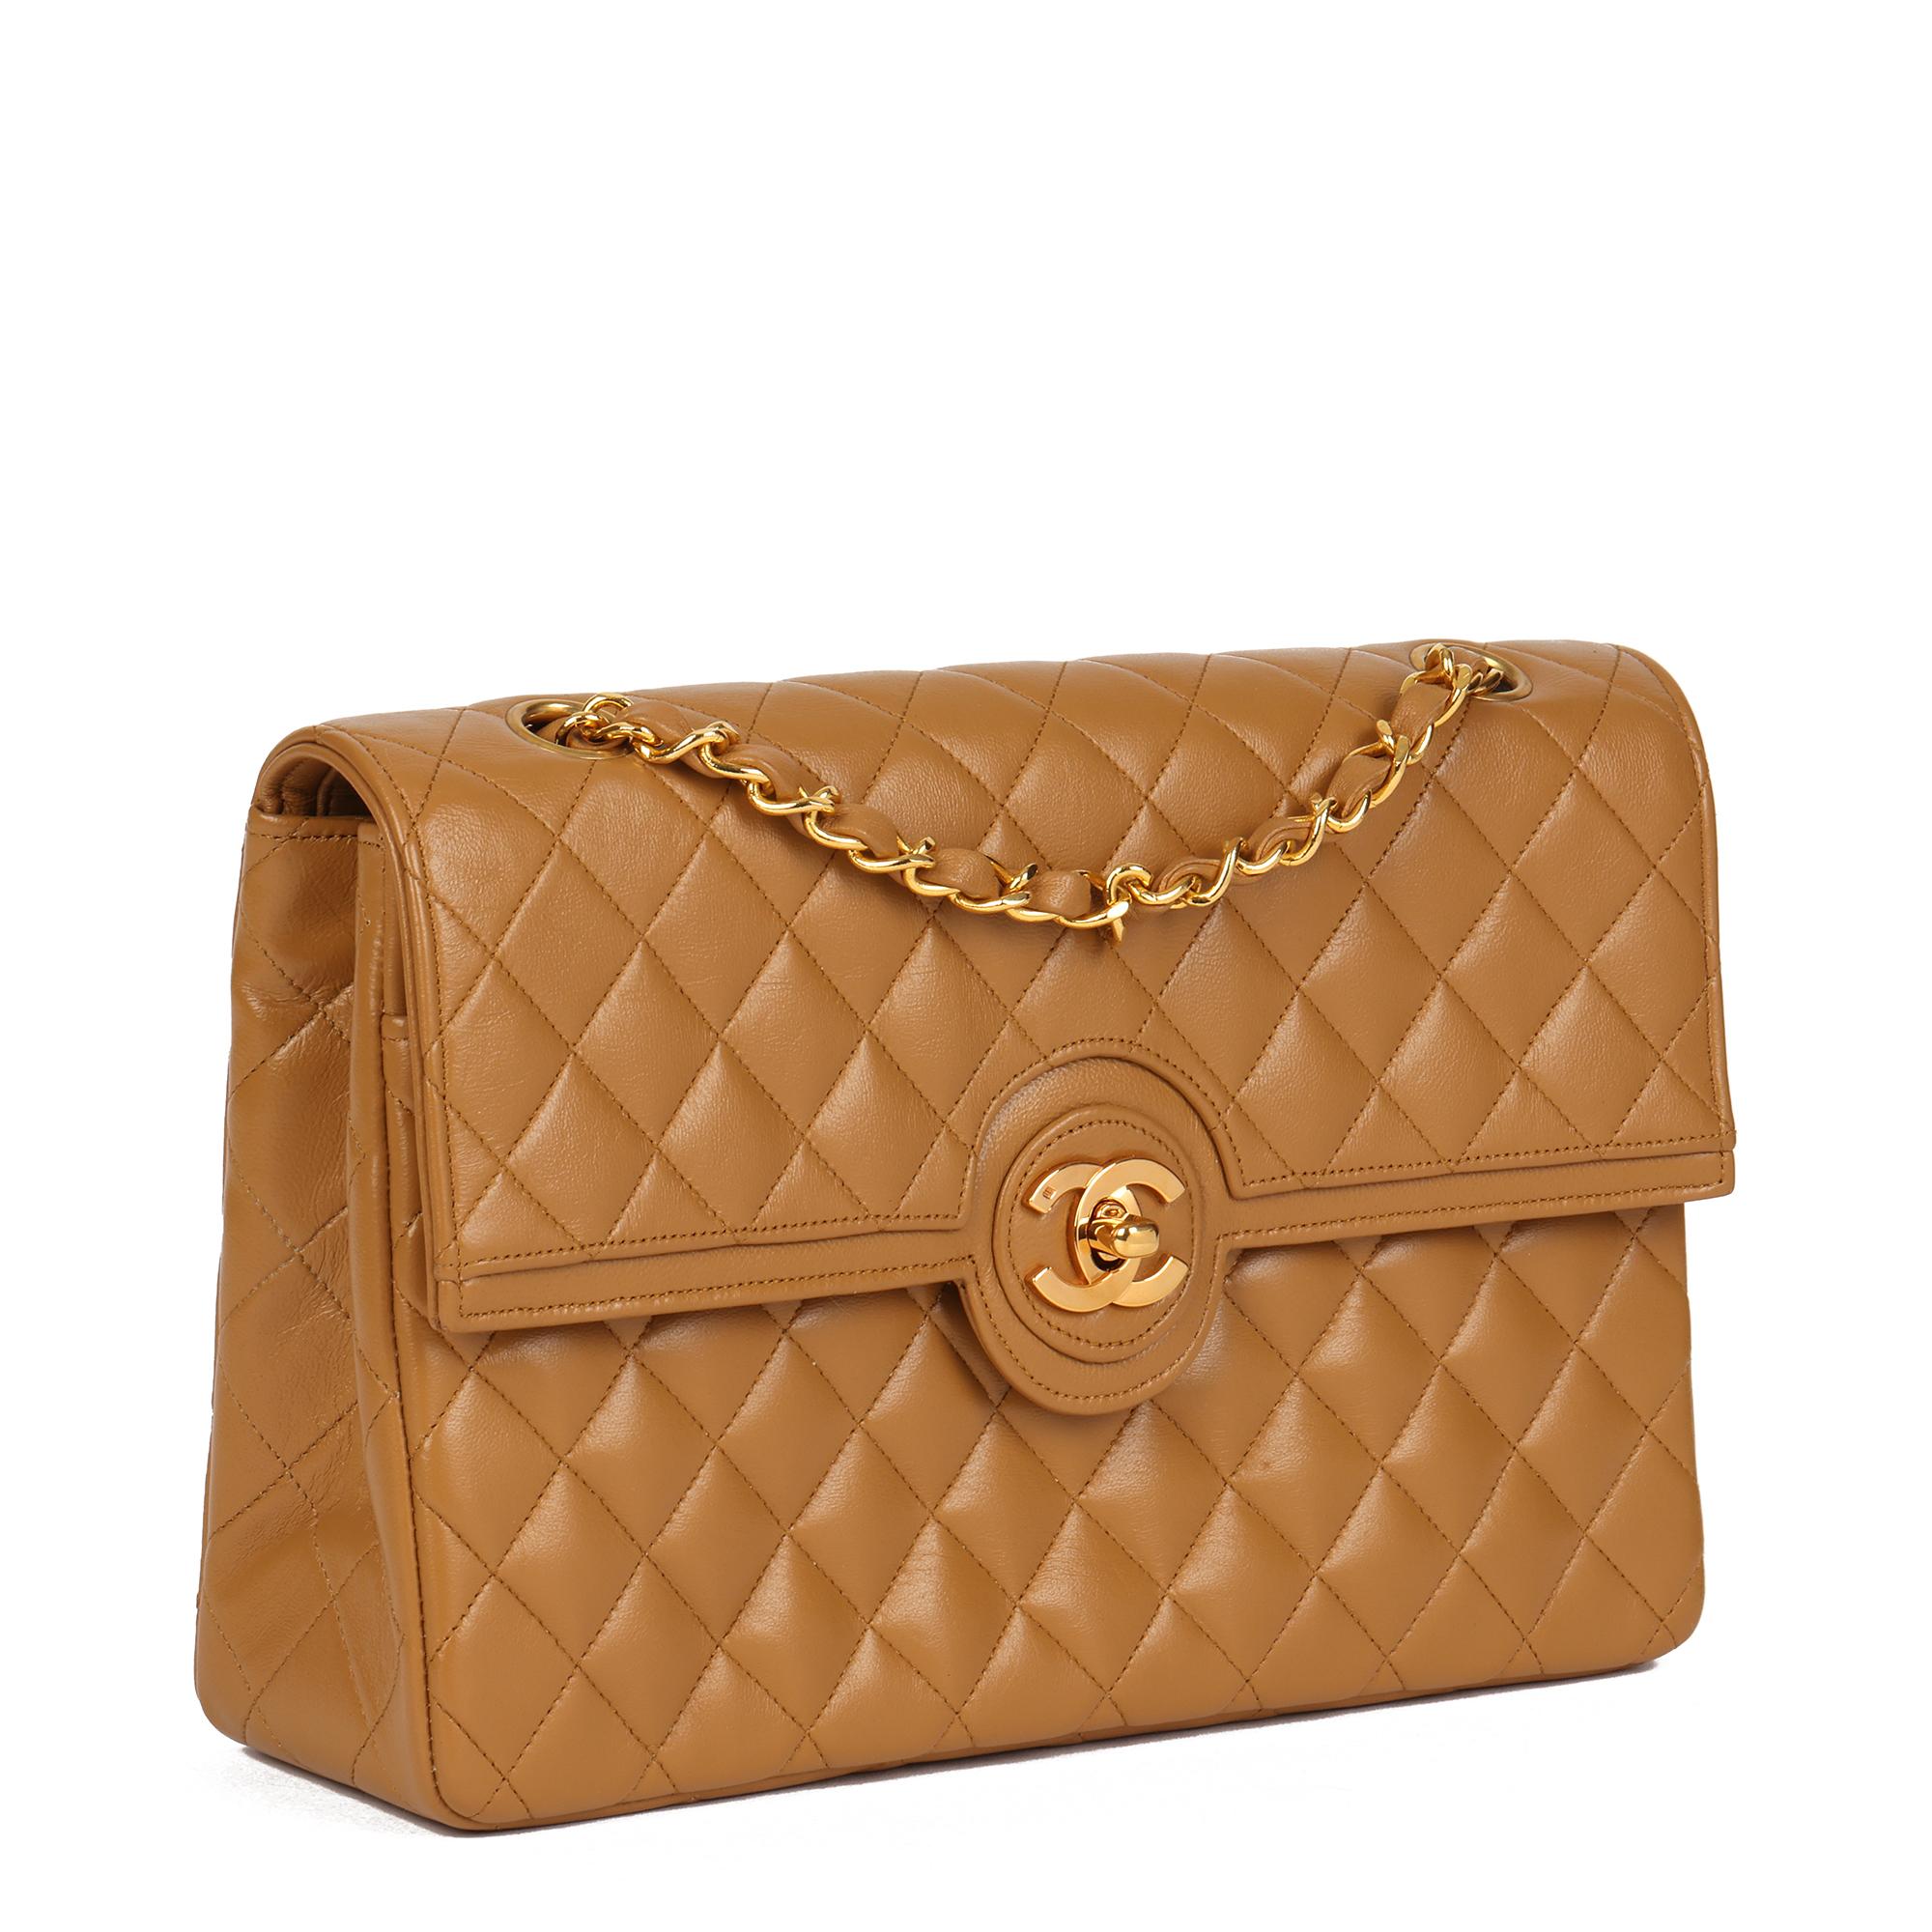 CHANEL
Caramel Quilted Lambskin Vintage Medium Classic Single Flap Bag

Serial Number: 1437883
Age (Circa): 1991
Accompanied By: Chanel Dust Bag   
Authenticity Details: Serial Sticker (Made in France)
Gender: Ladies
Type: Shoulder

Colour: